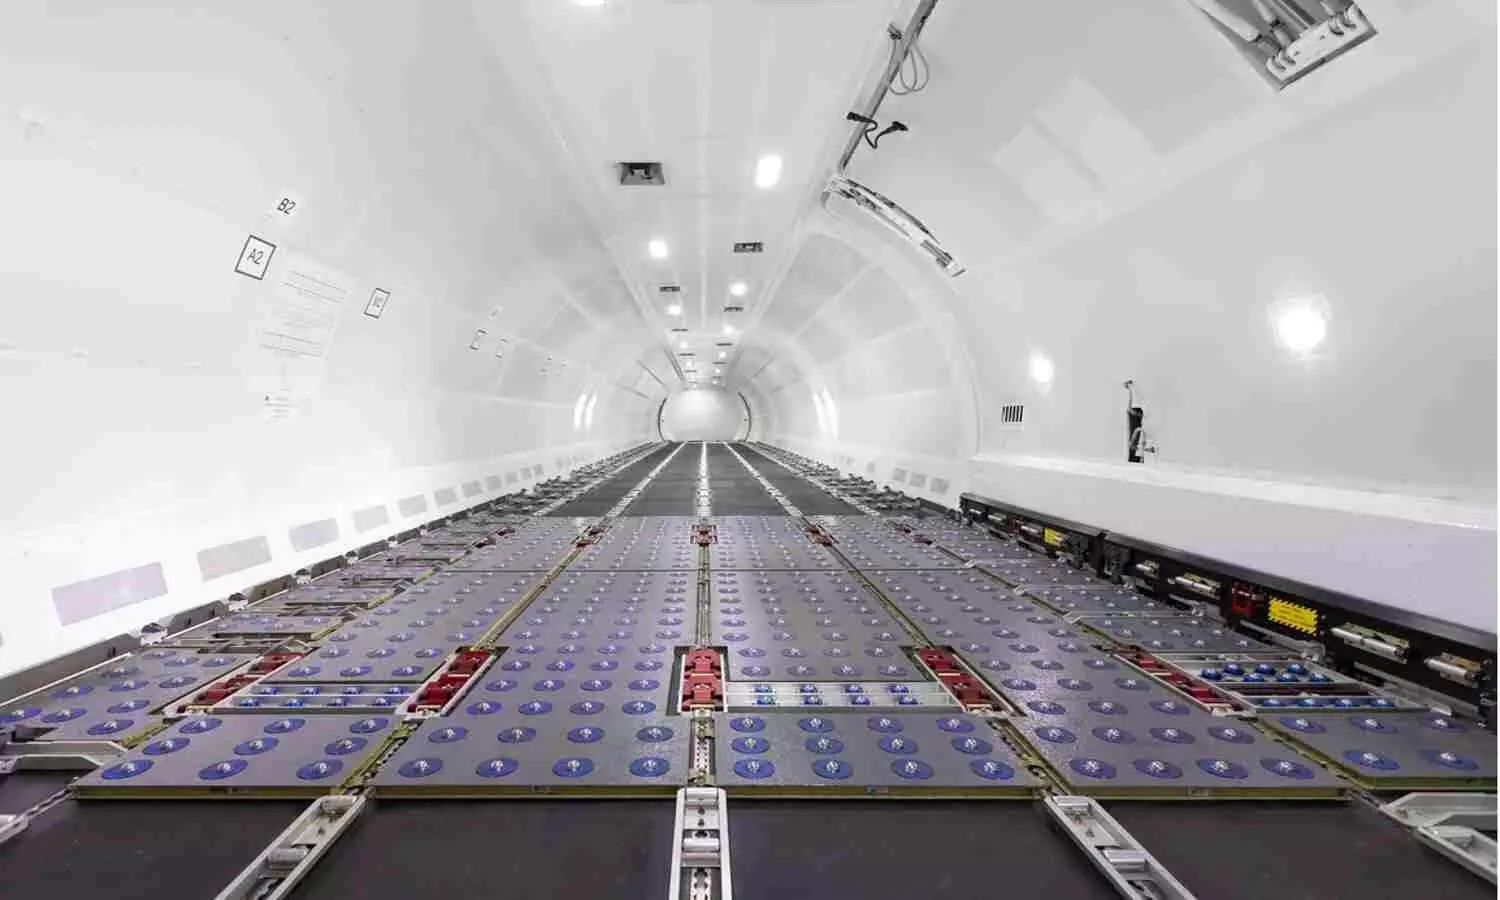 AEI receives UK-CAA  approval for B737-800SF freighter conversion